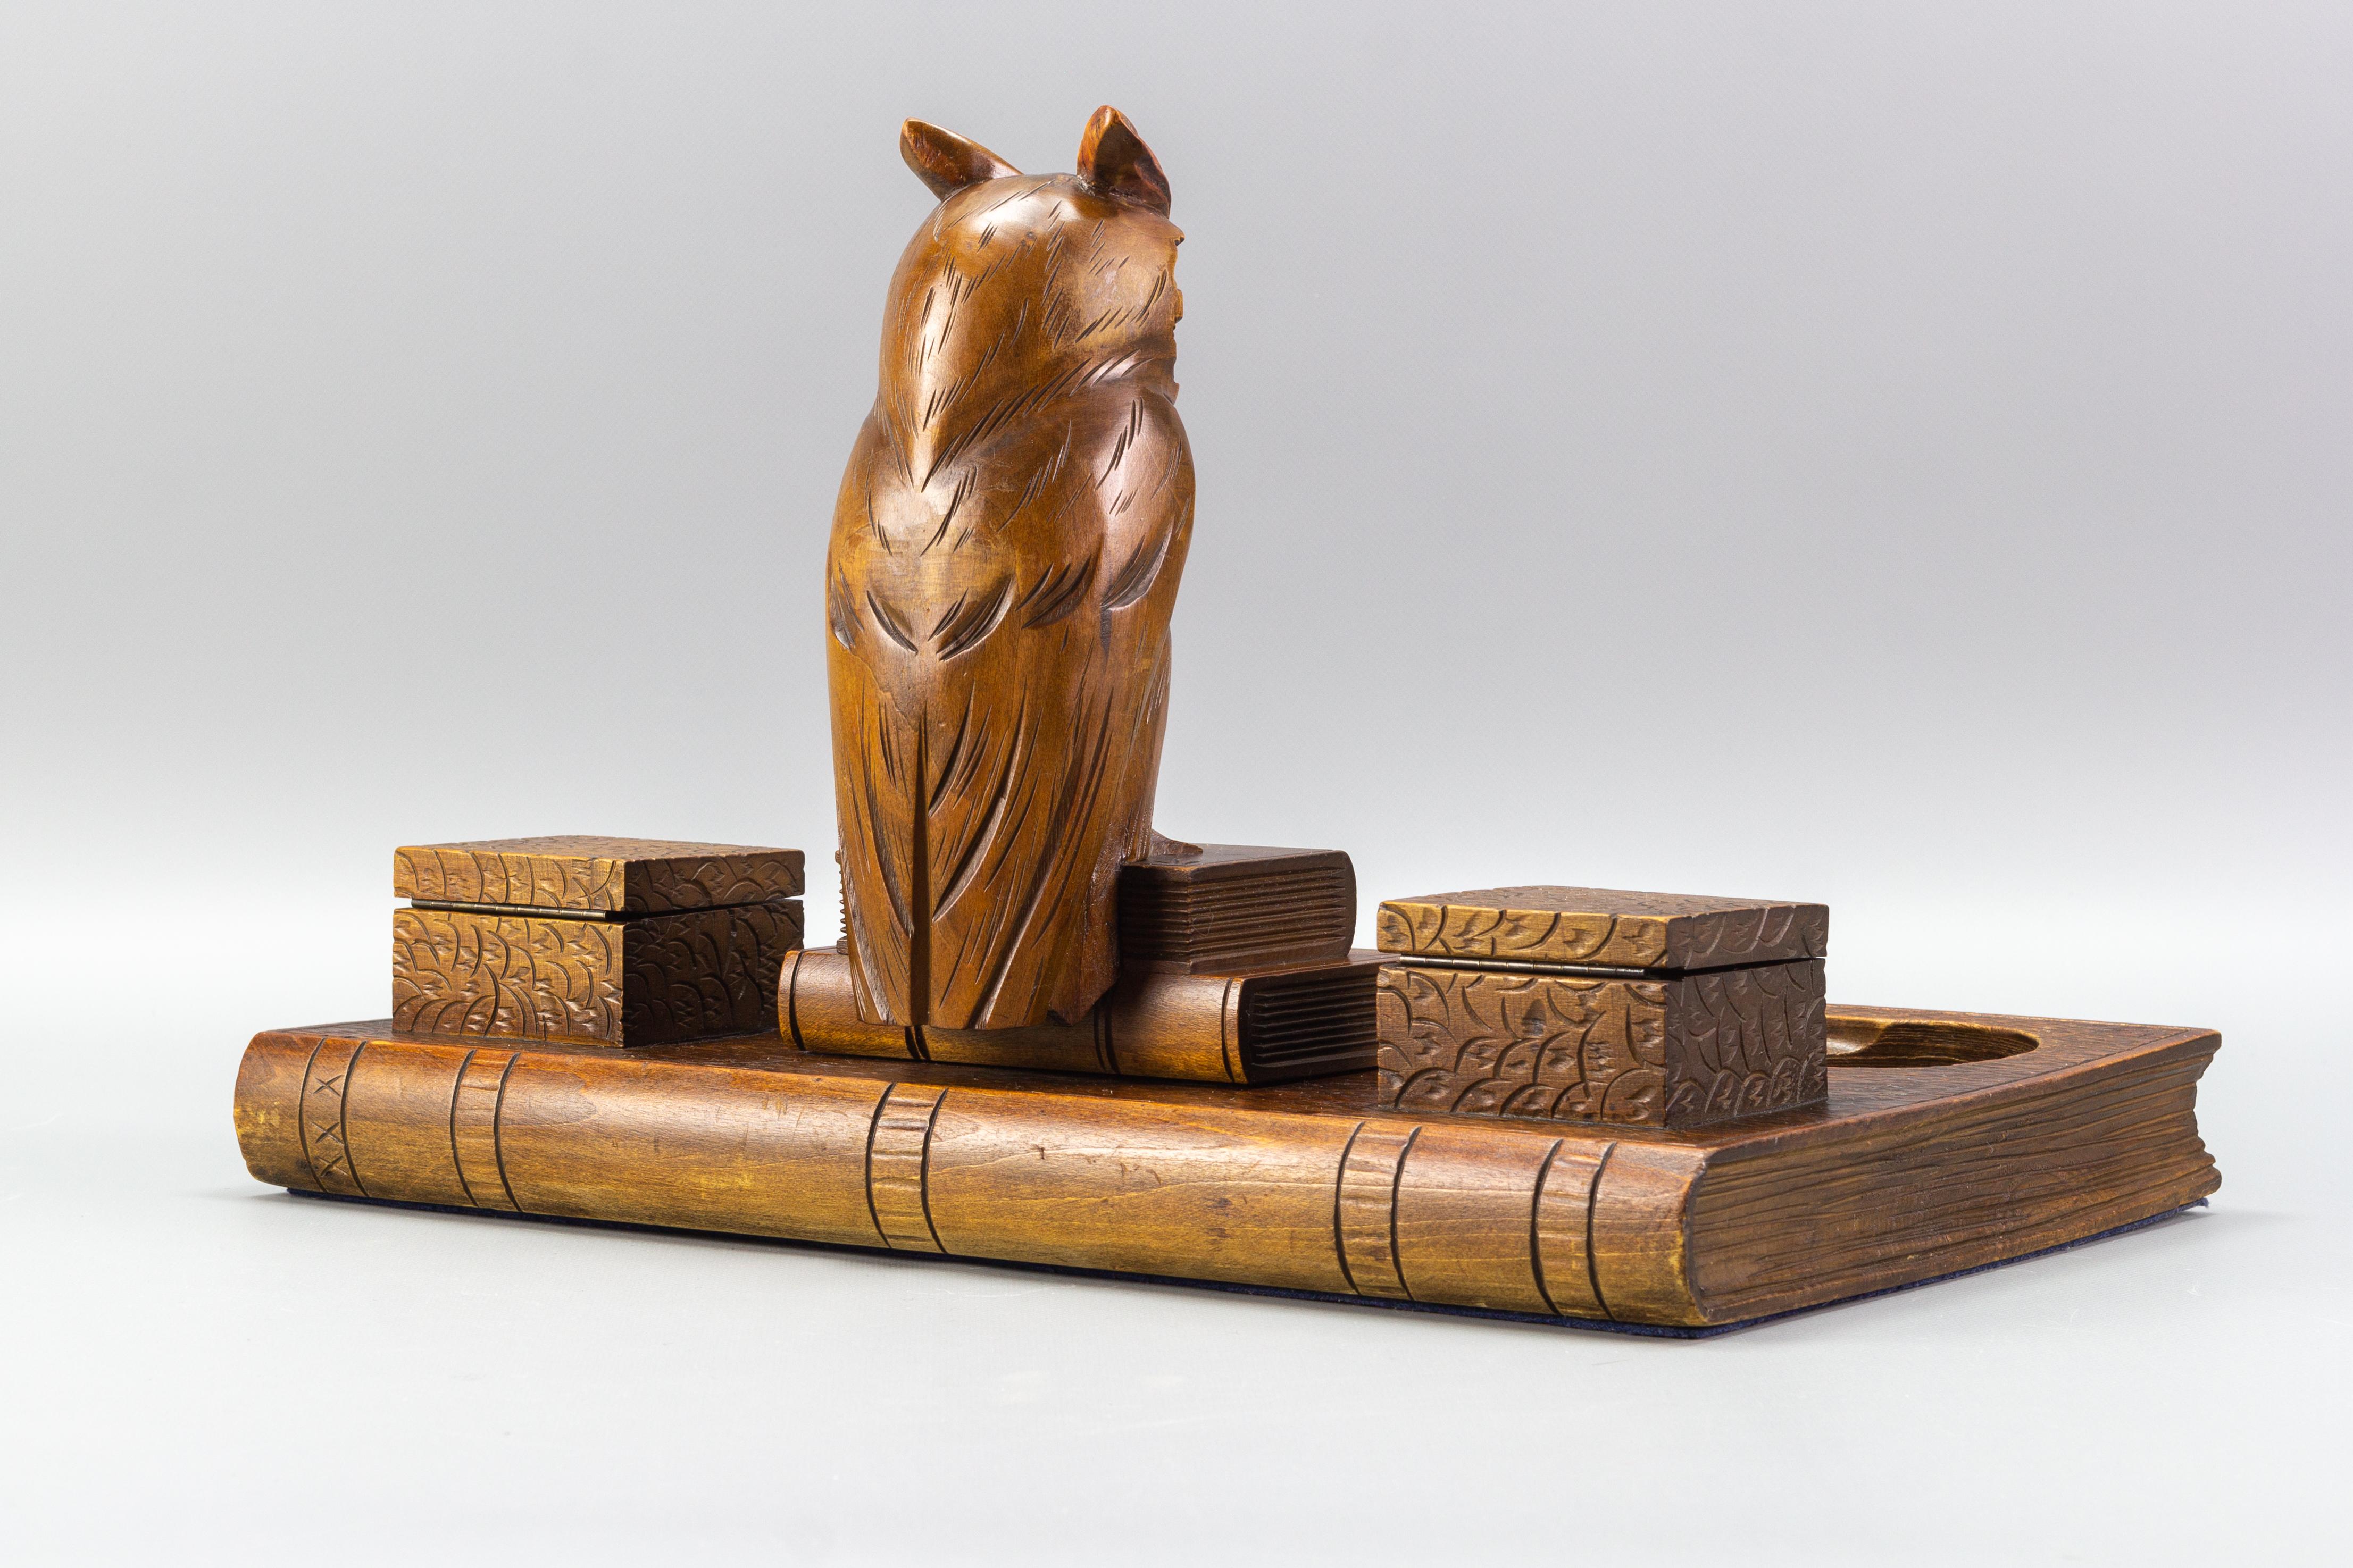 Mid-20th Century Art Deco Hand-Carved Book-Shaped Wooden Inkwell with Owl Figure, 1930s